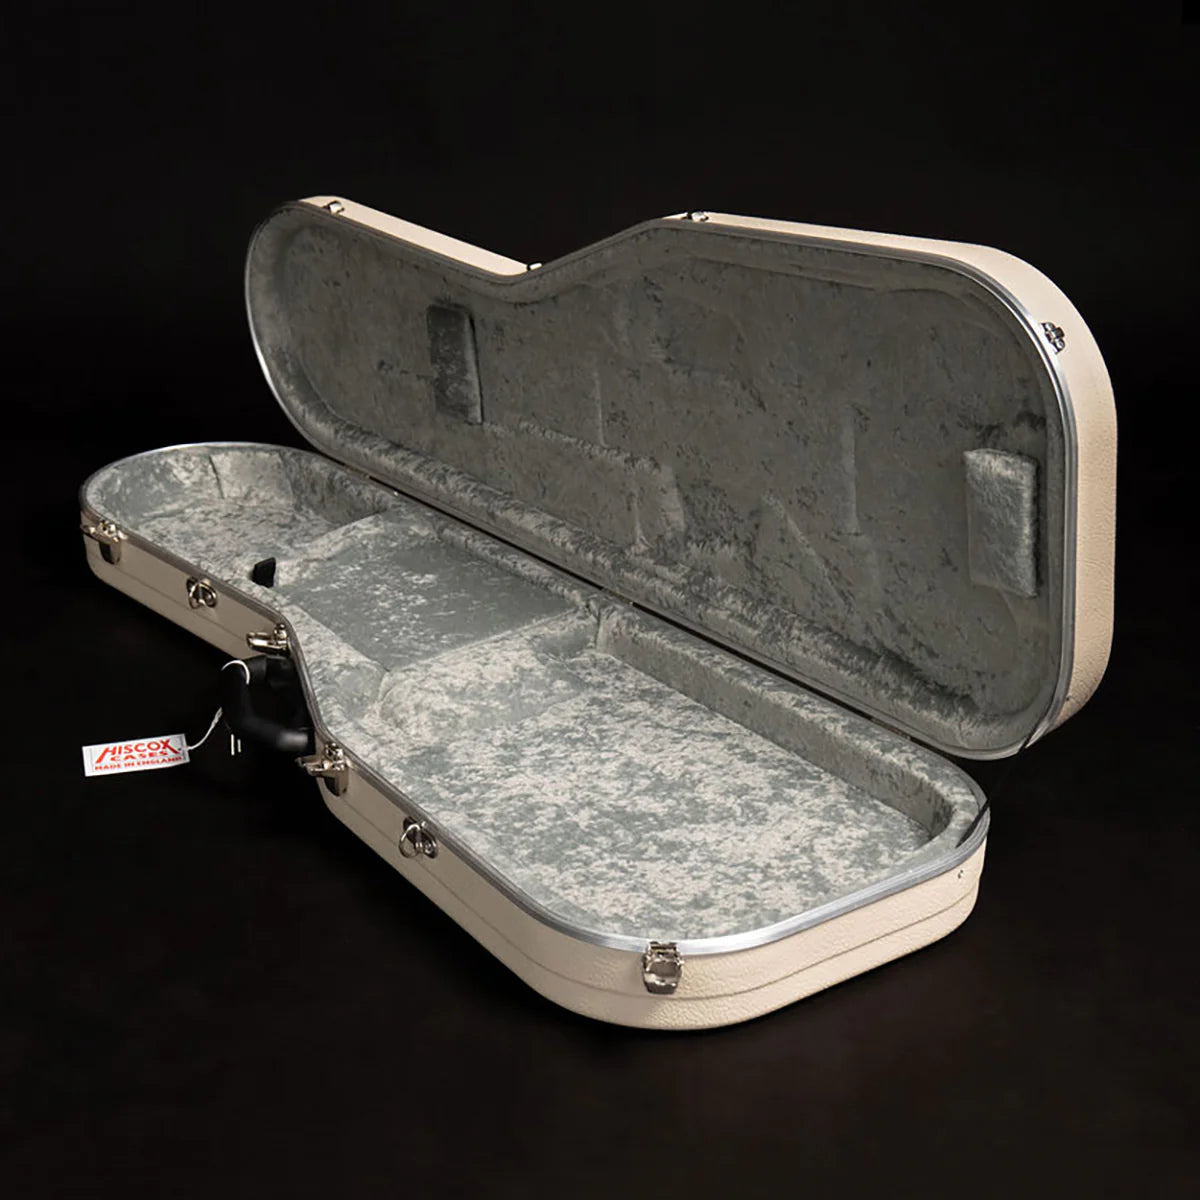 Hiscox Strat/Tele Electric Guitar Case - Ivory/Silver